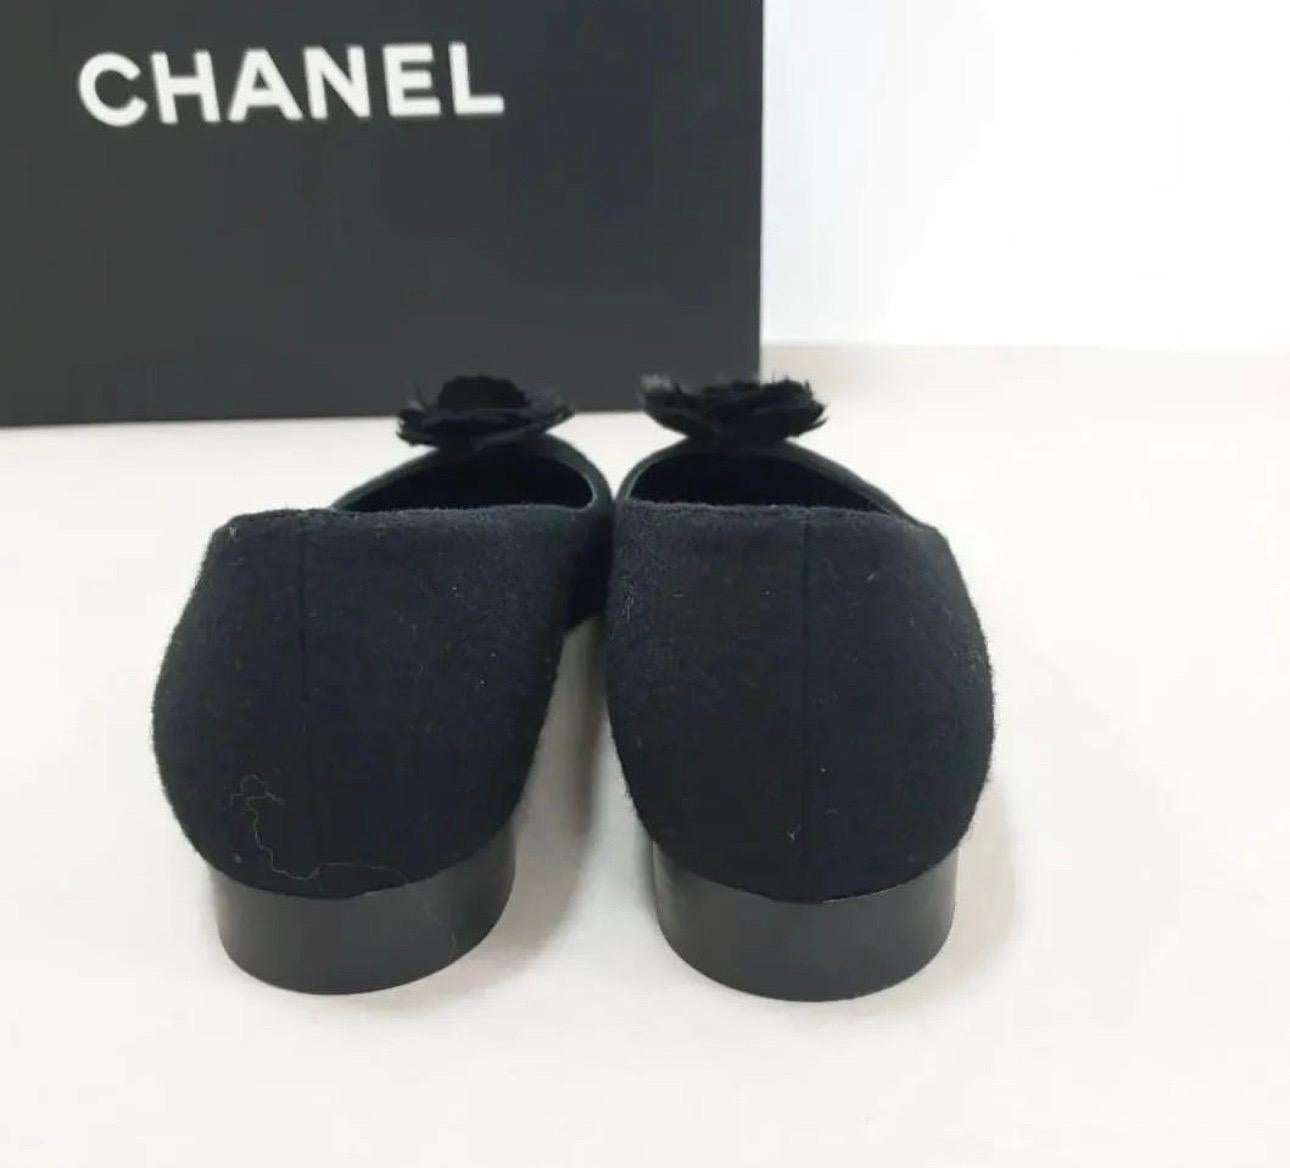 Ballerina flats from Chanel 20B Collection.
Black wool
Cap toe with a black bow and crystal star.
0.75